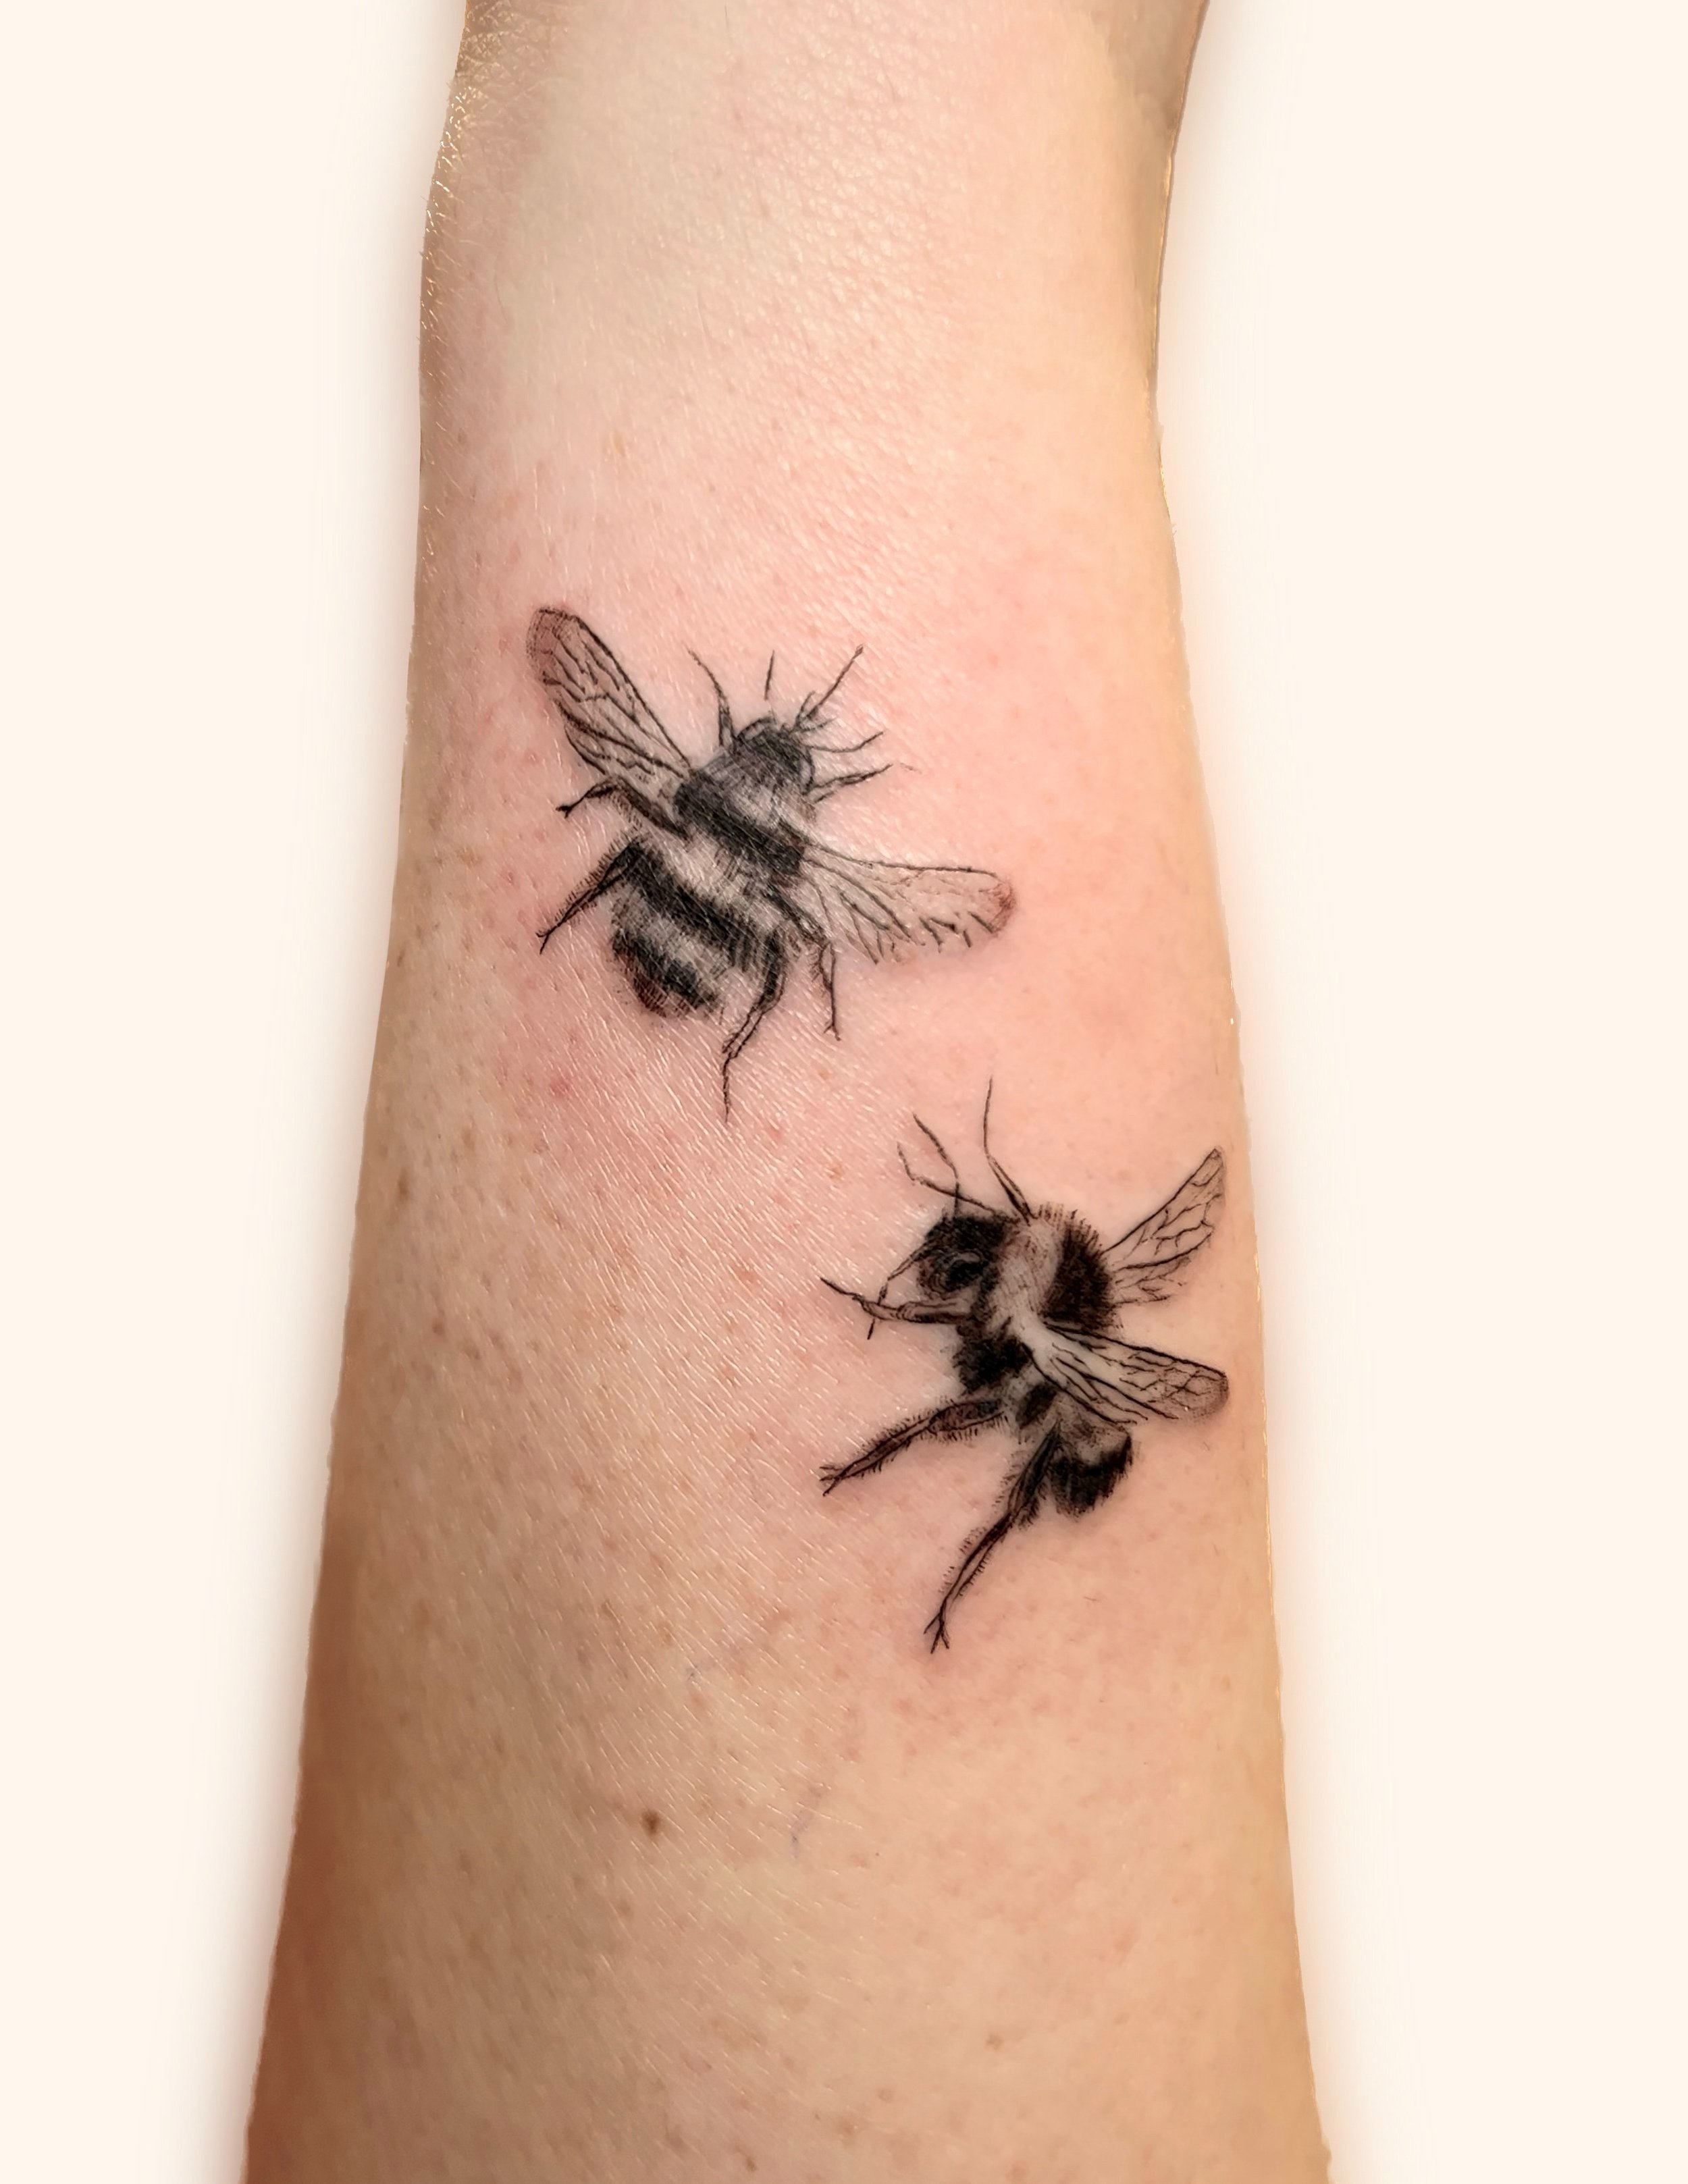 Silver Ant Tattoo  Bee and flower fine line tattoo designed by Chloe   Facebook